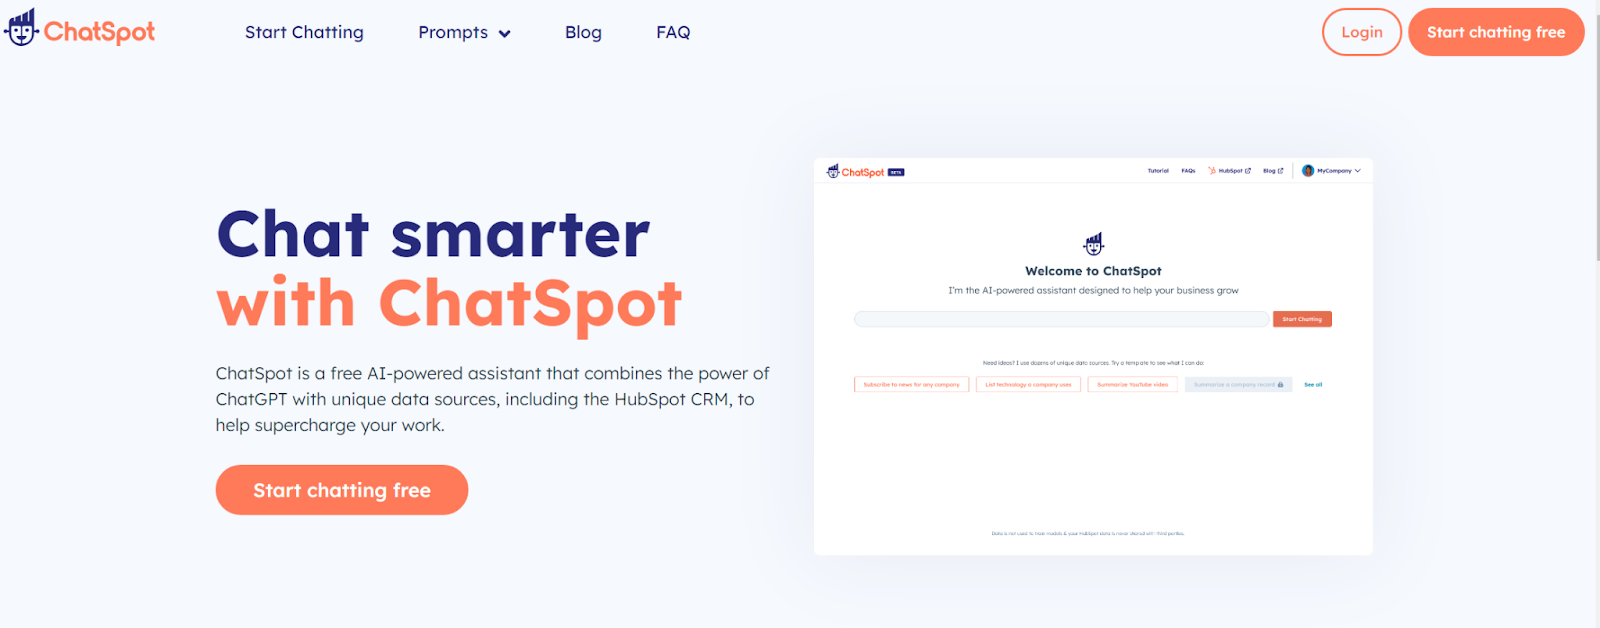 The landing page for HubSpot's conversational AI tool, ChatSpot, is a free option to help customers "chat smarter."